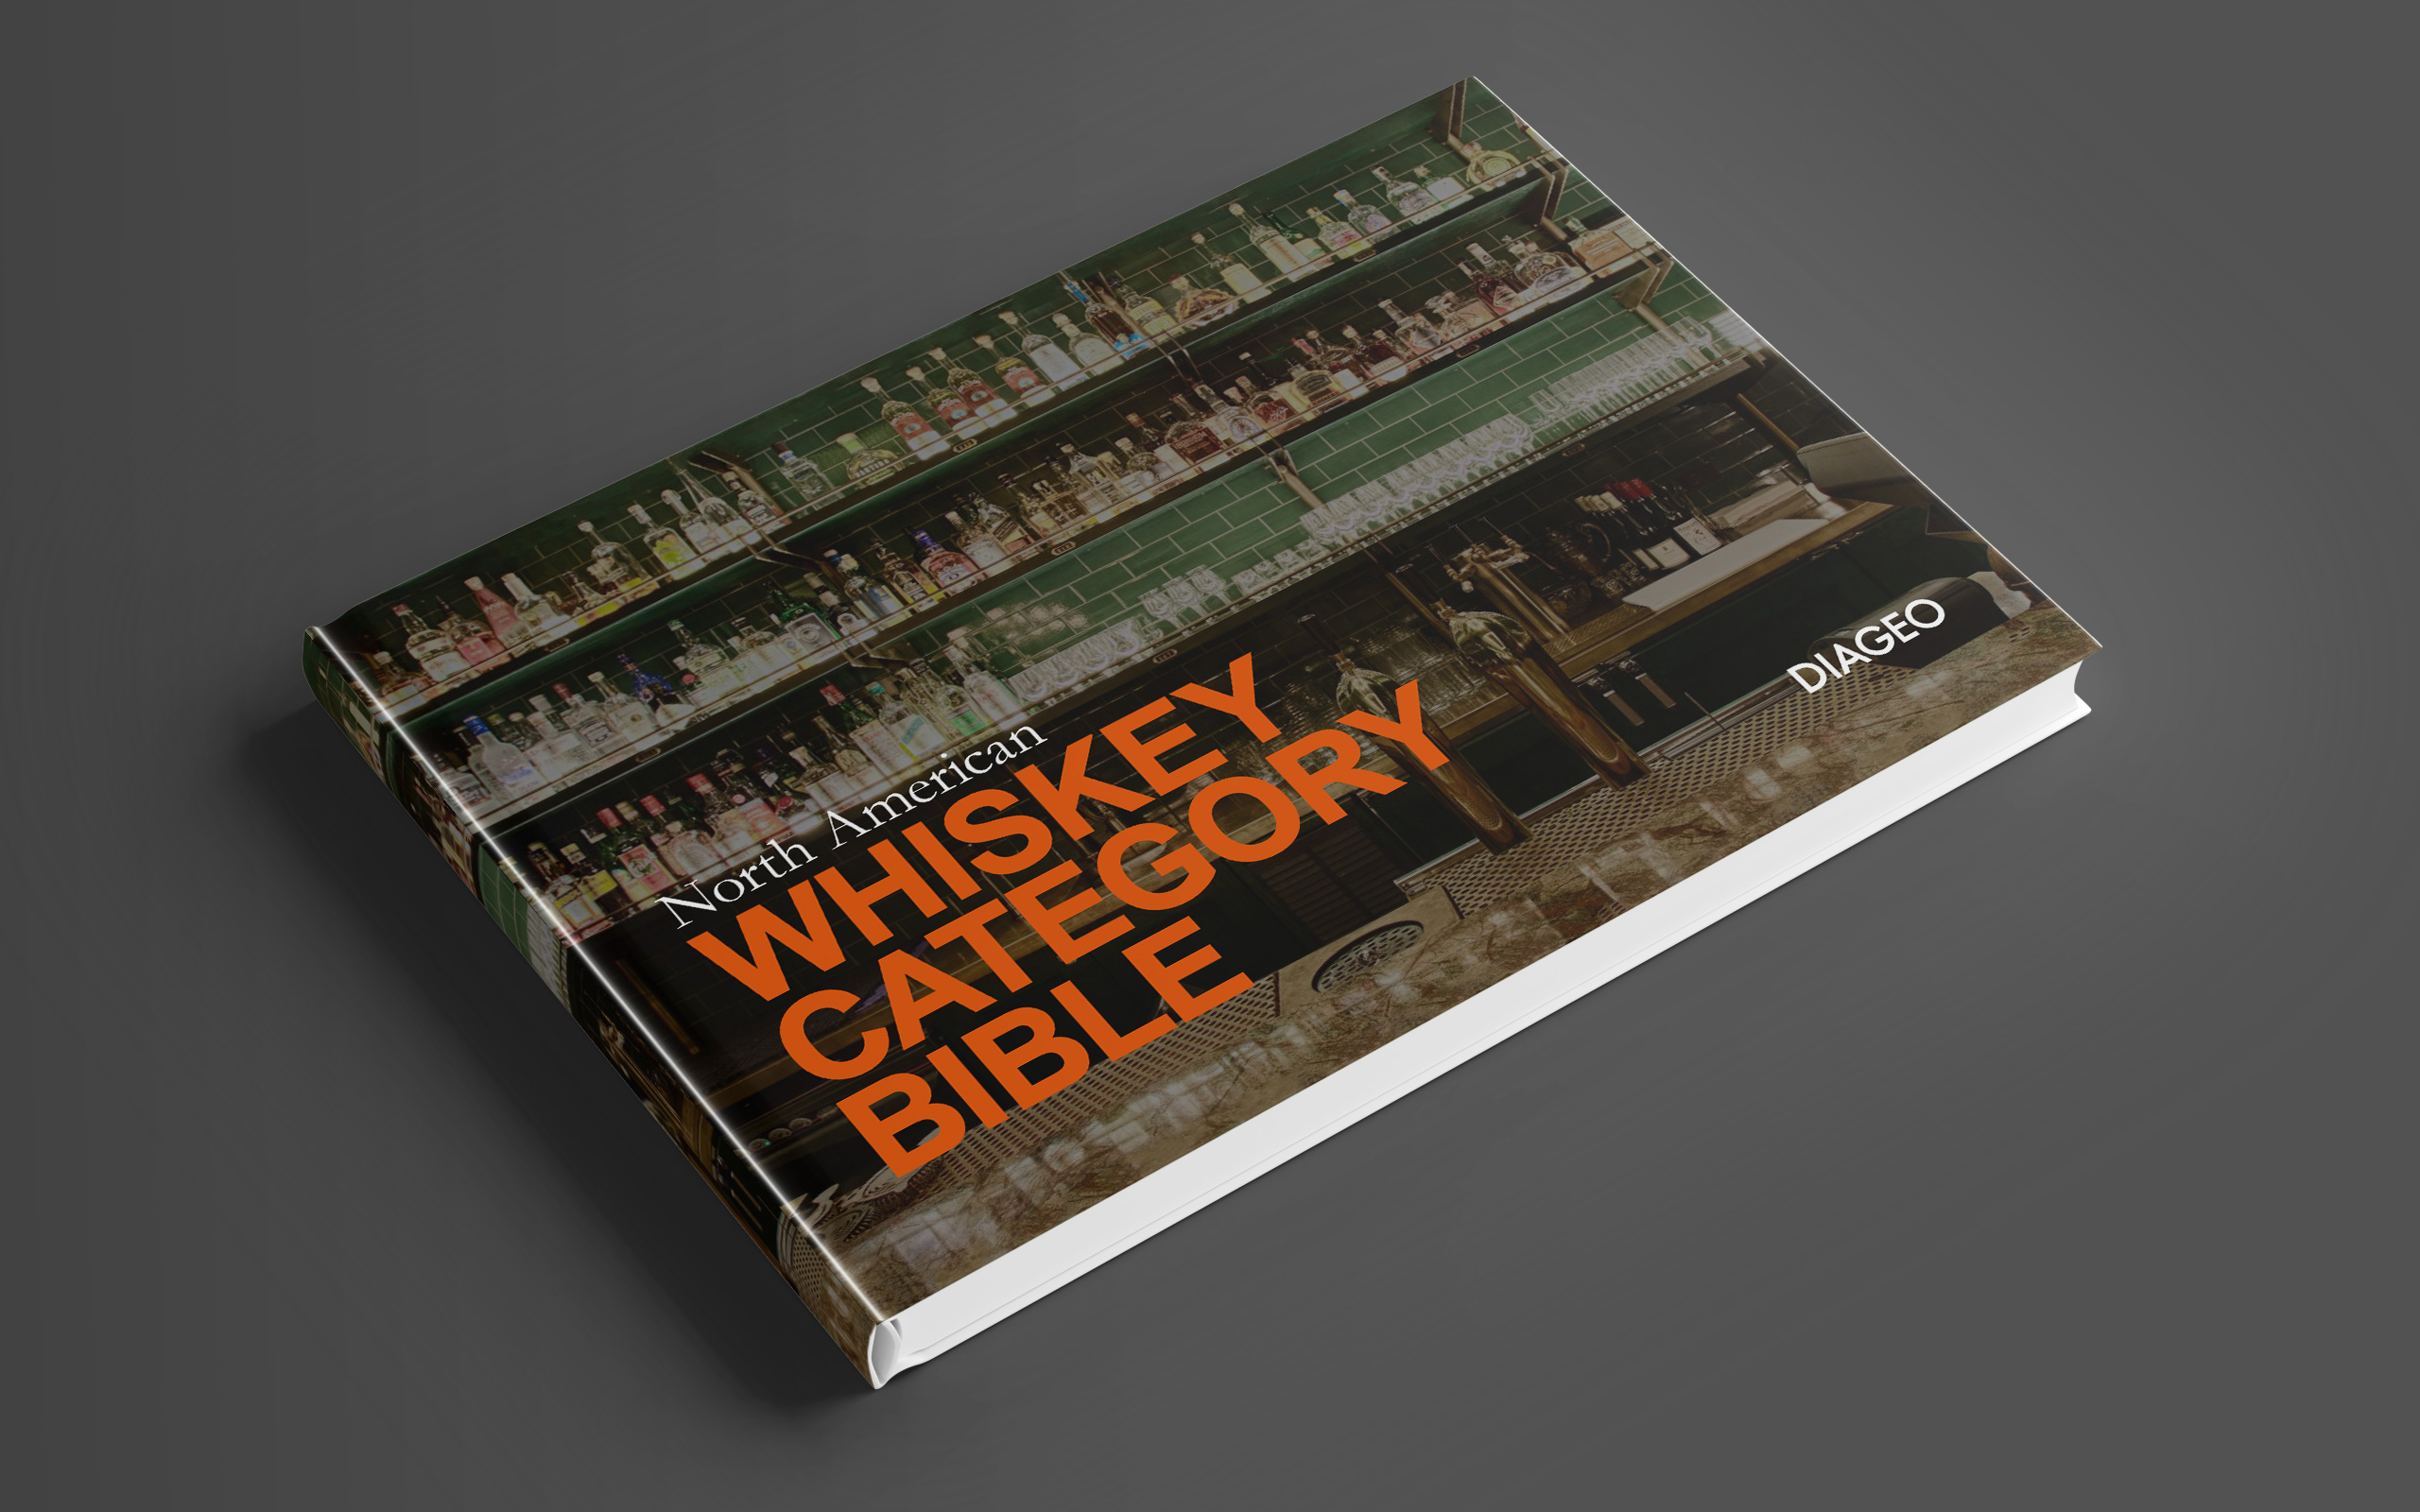 Whiskey Category Bible 